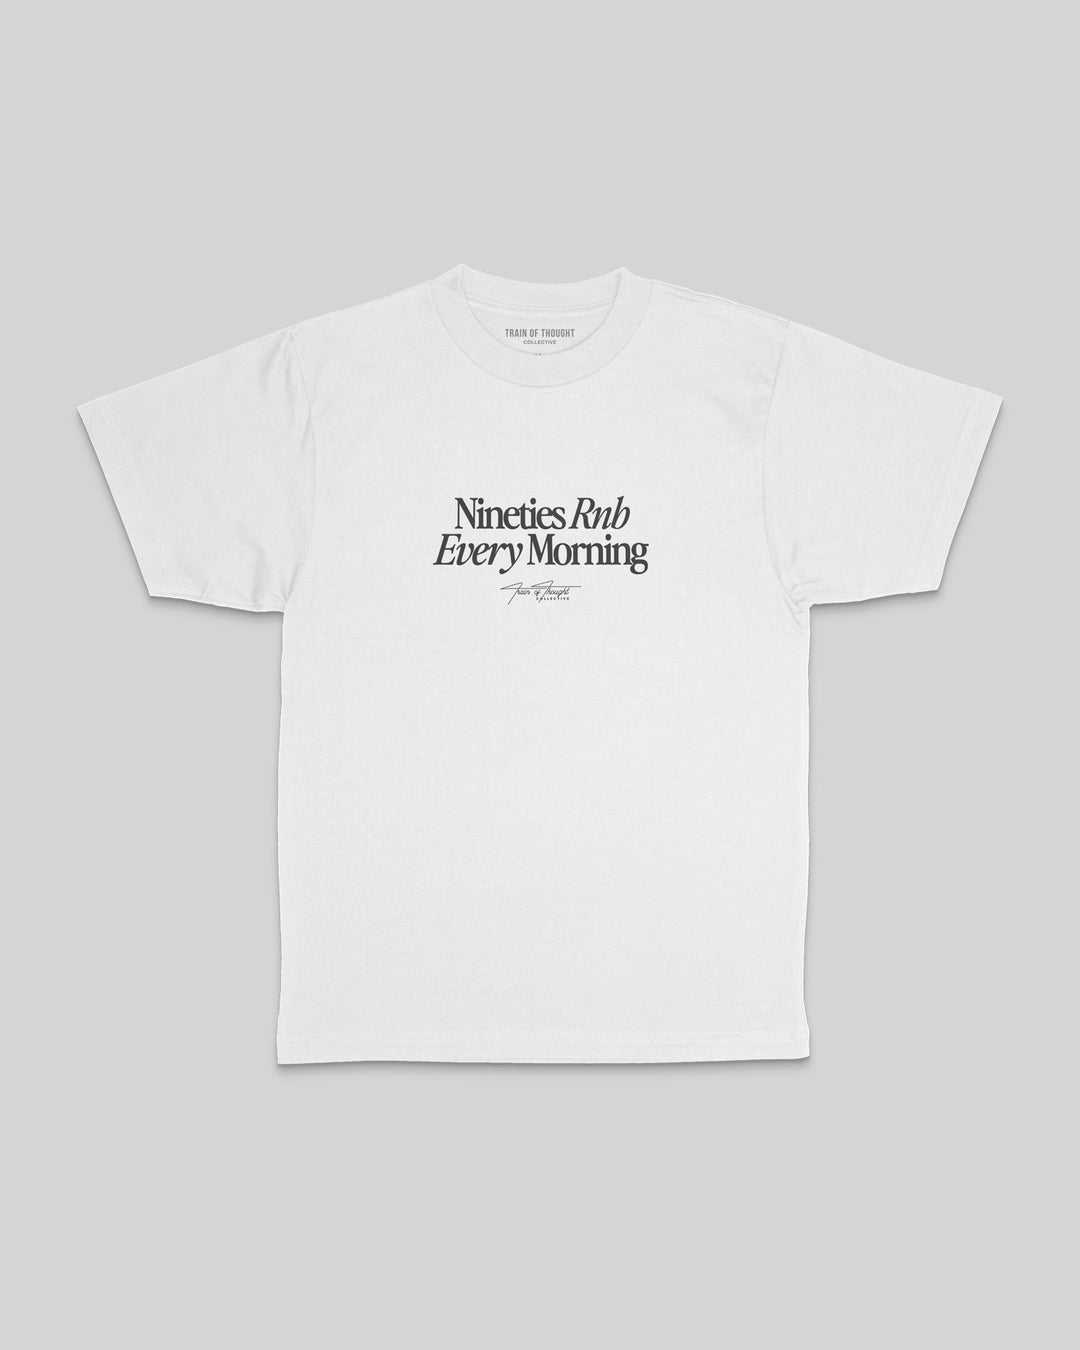 Nineties Rnb Every Morning $8 Tee V1 - trainofthoughtcollective